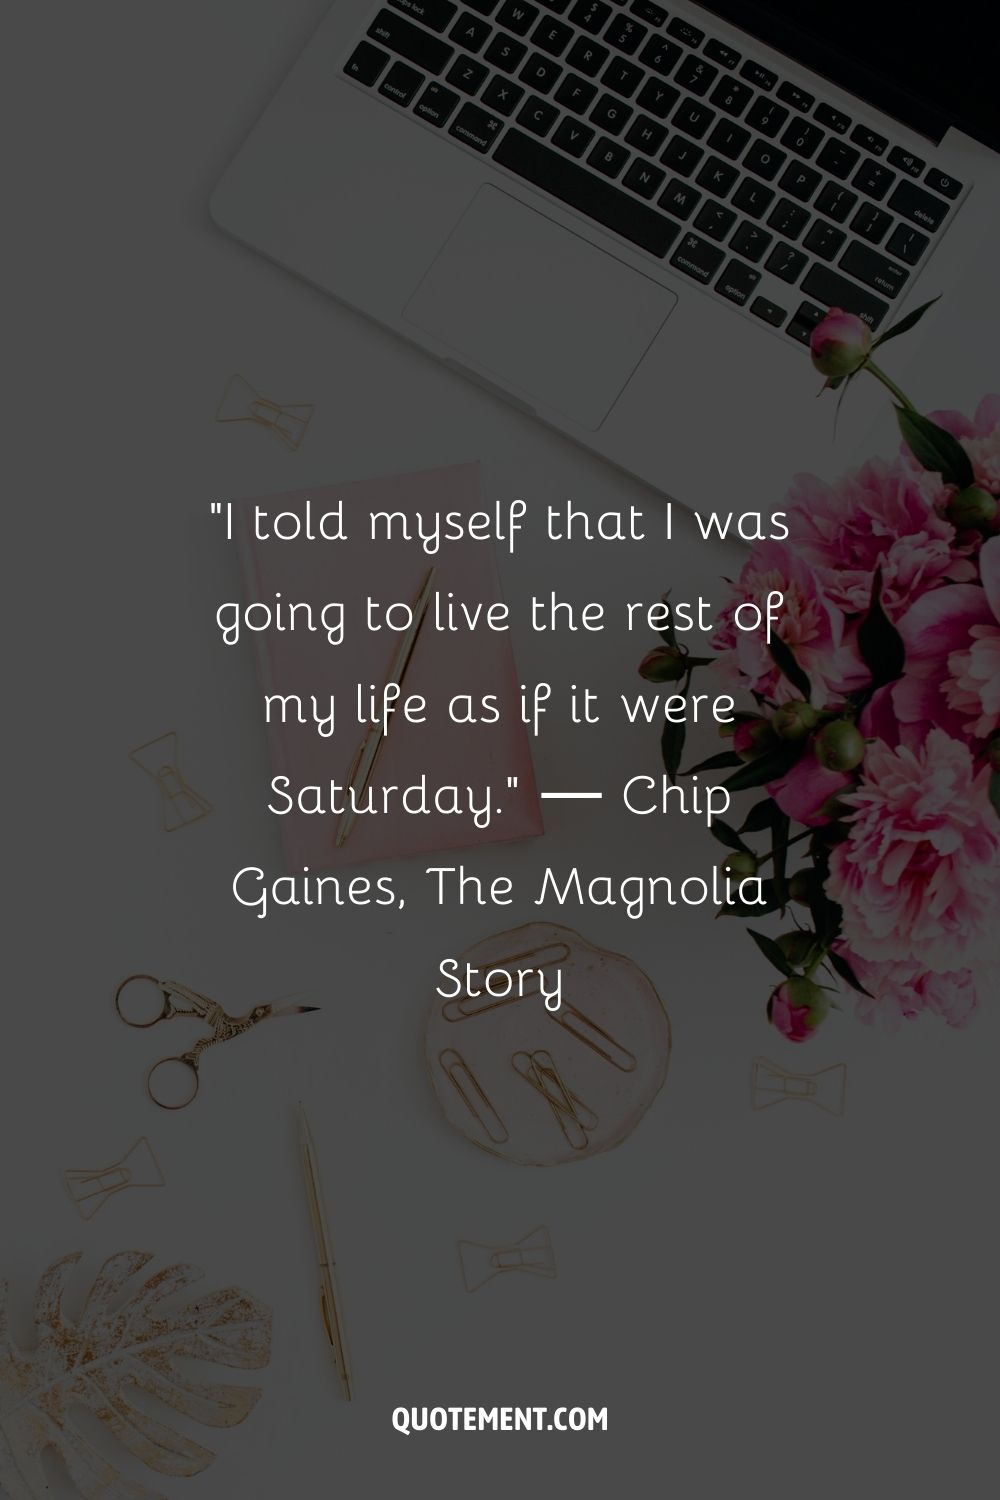 “I told myself that I was going to live the rest of my life as if it were Saturday.” ― Chip Gaines, The Magnolia Story